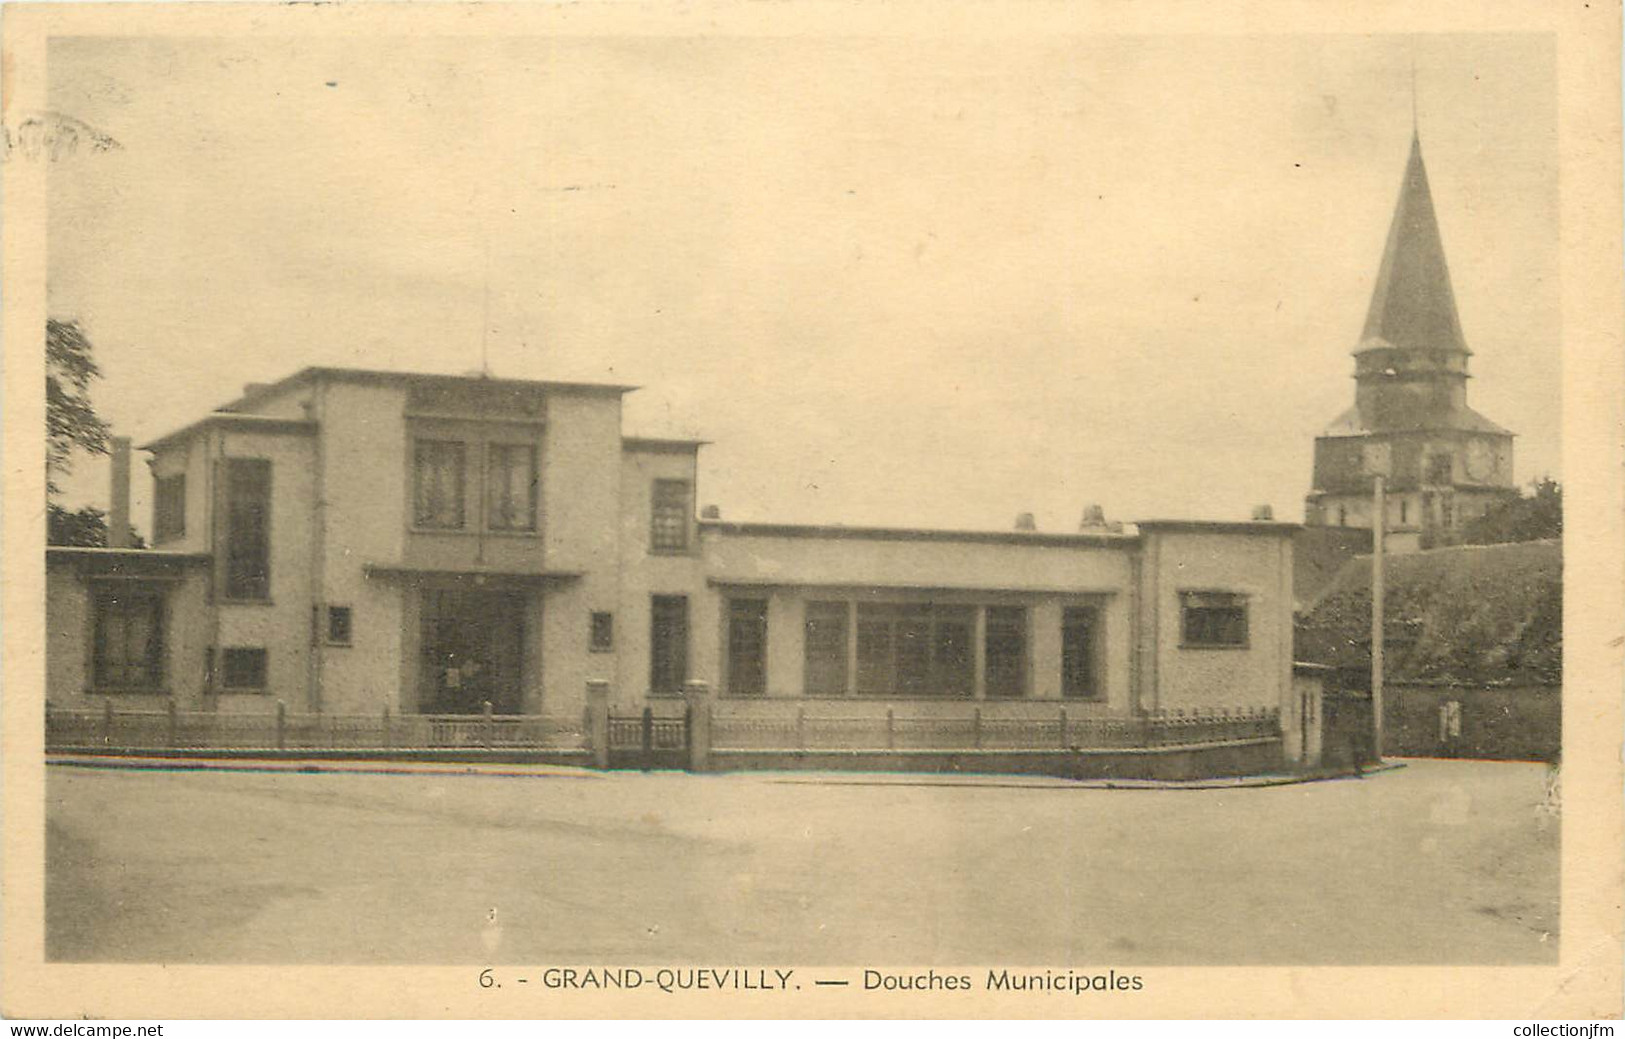 / CPA FRANCE 76 "Grand Quevilly, Douches Municipales" - Le Grand-Quevilly